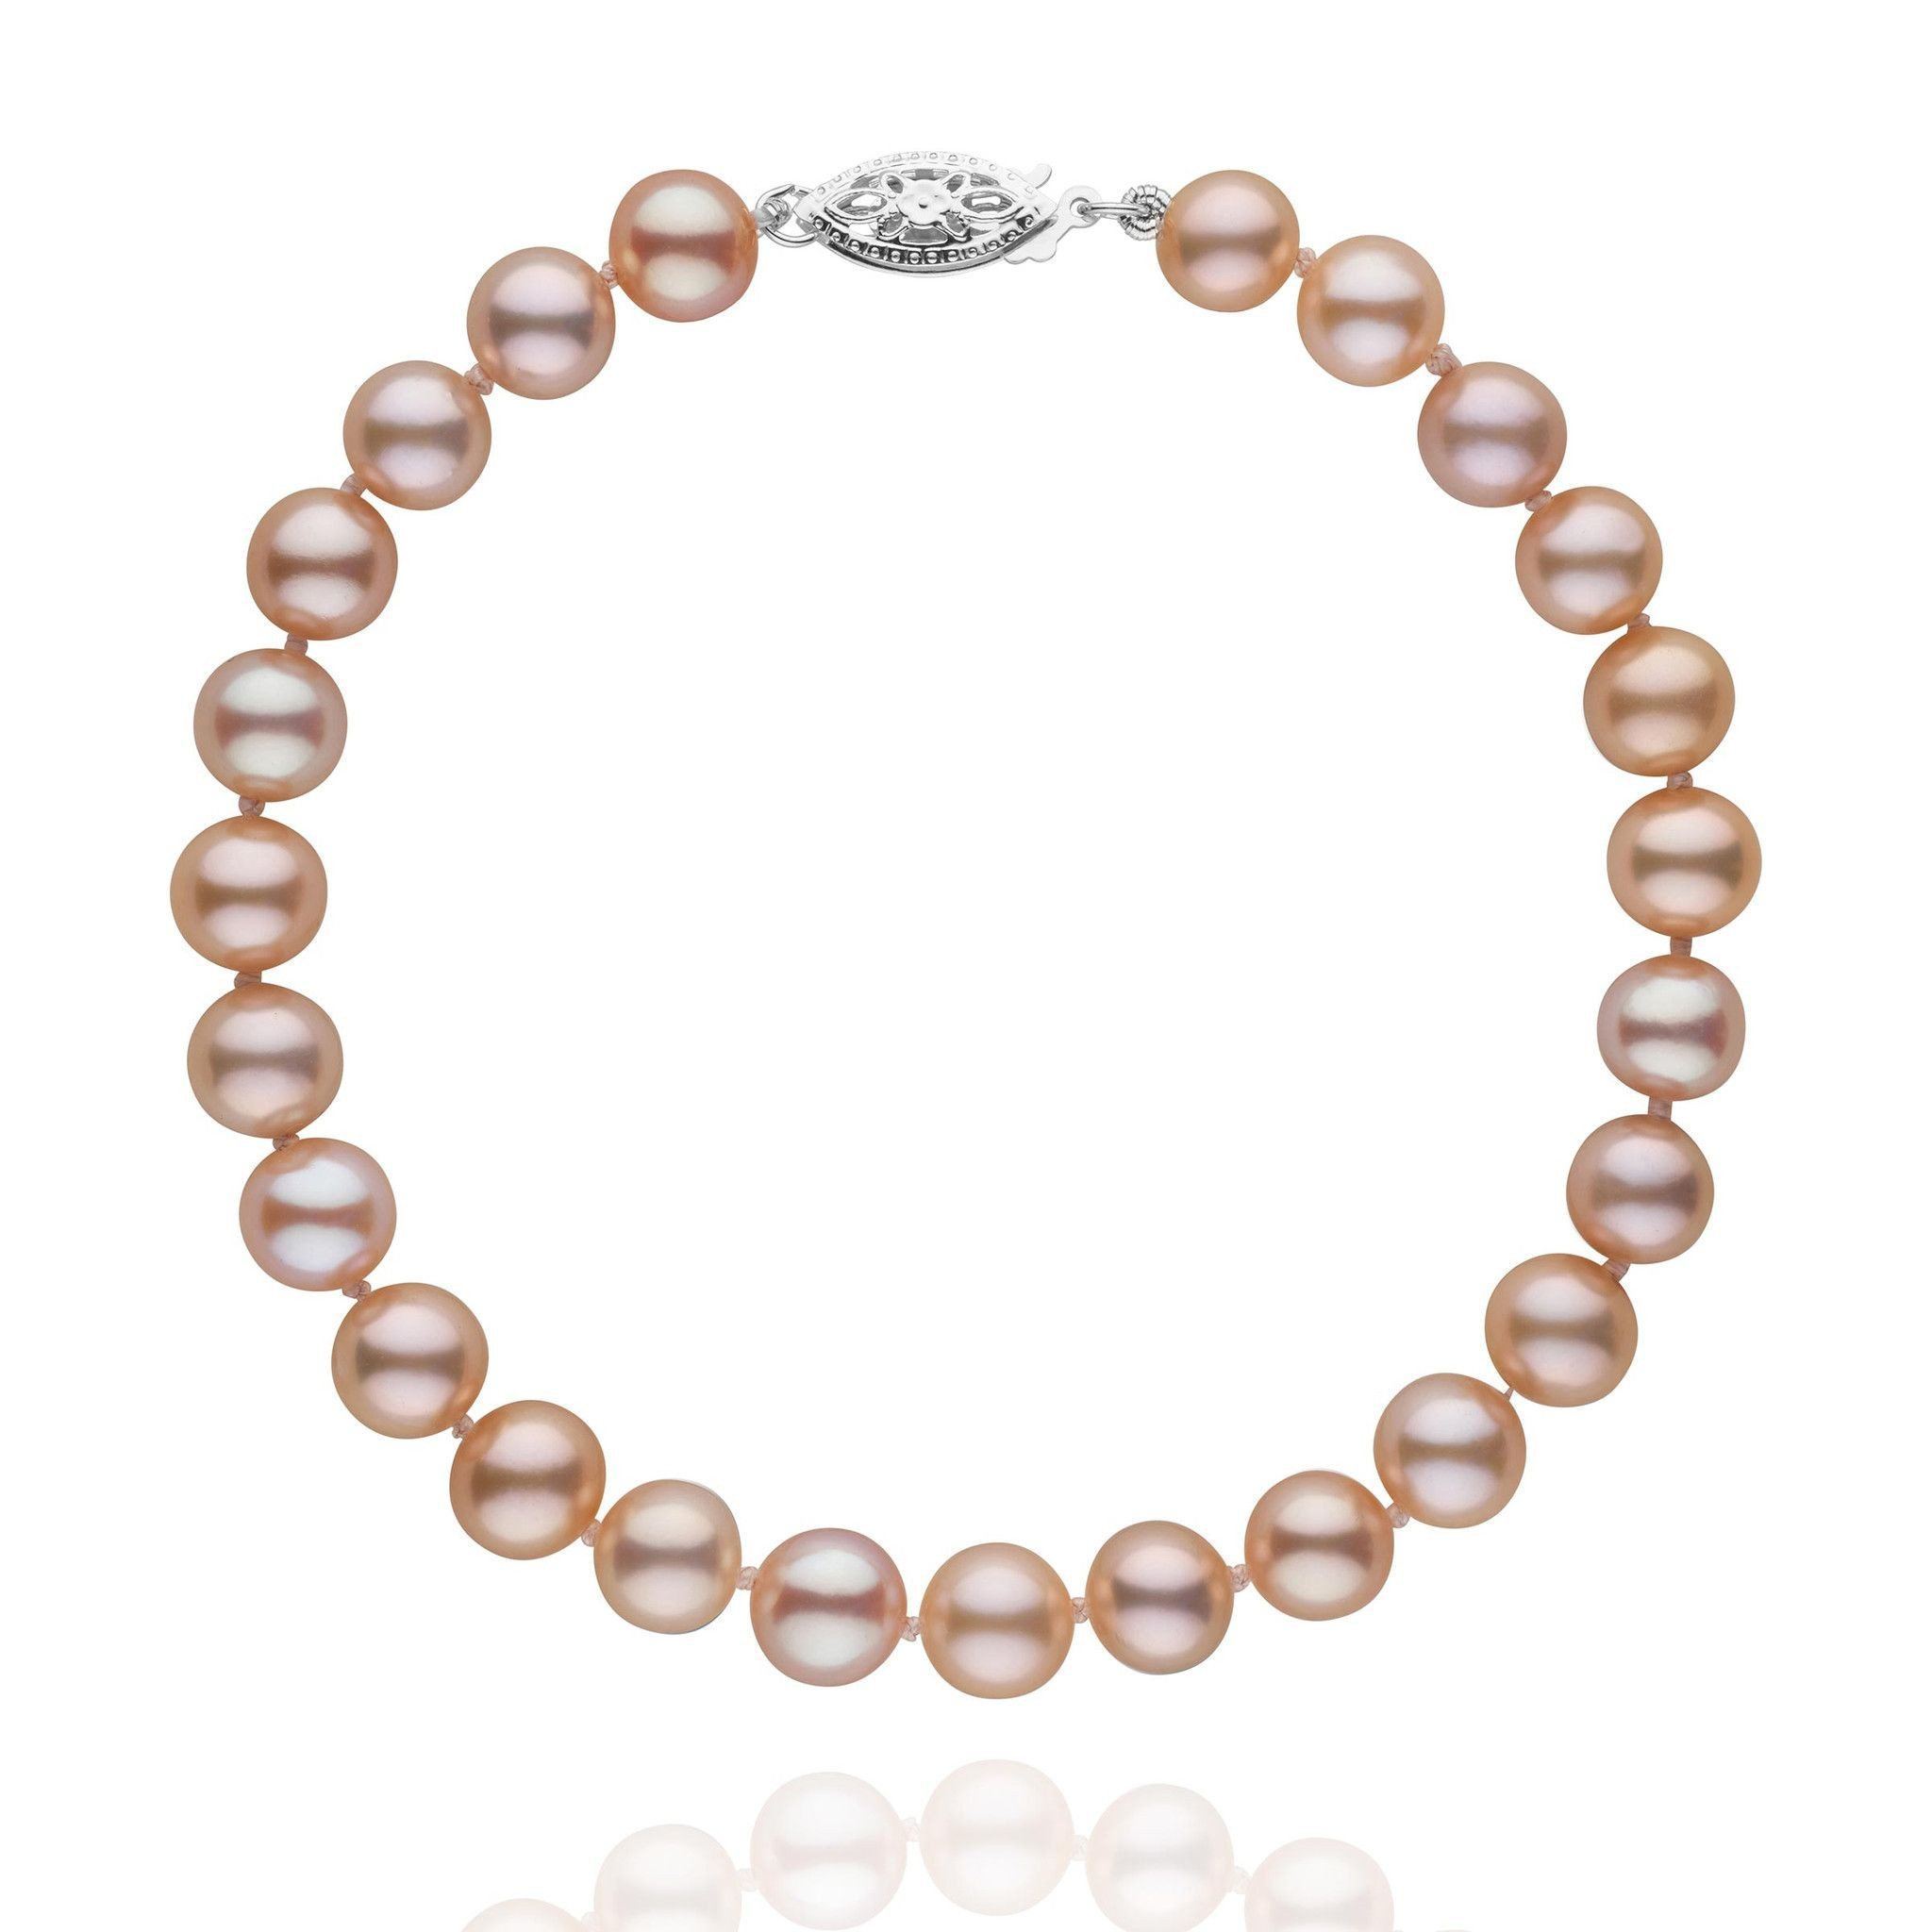 6.5-7.0 mm Pink to Peach Freshwater AAA Pearl Bracelet